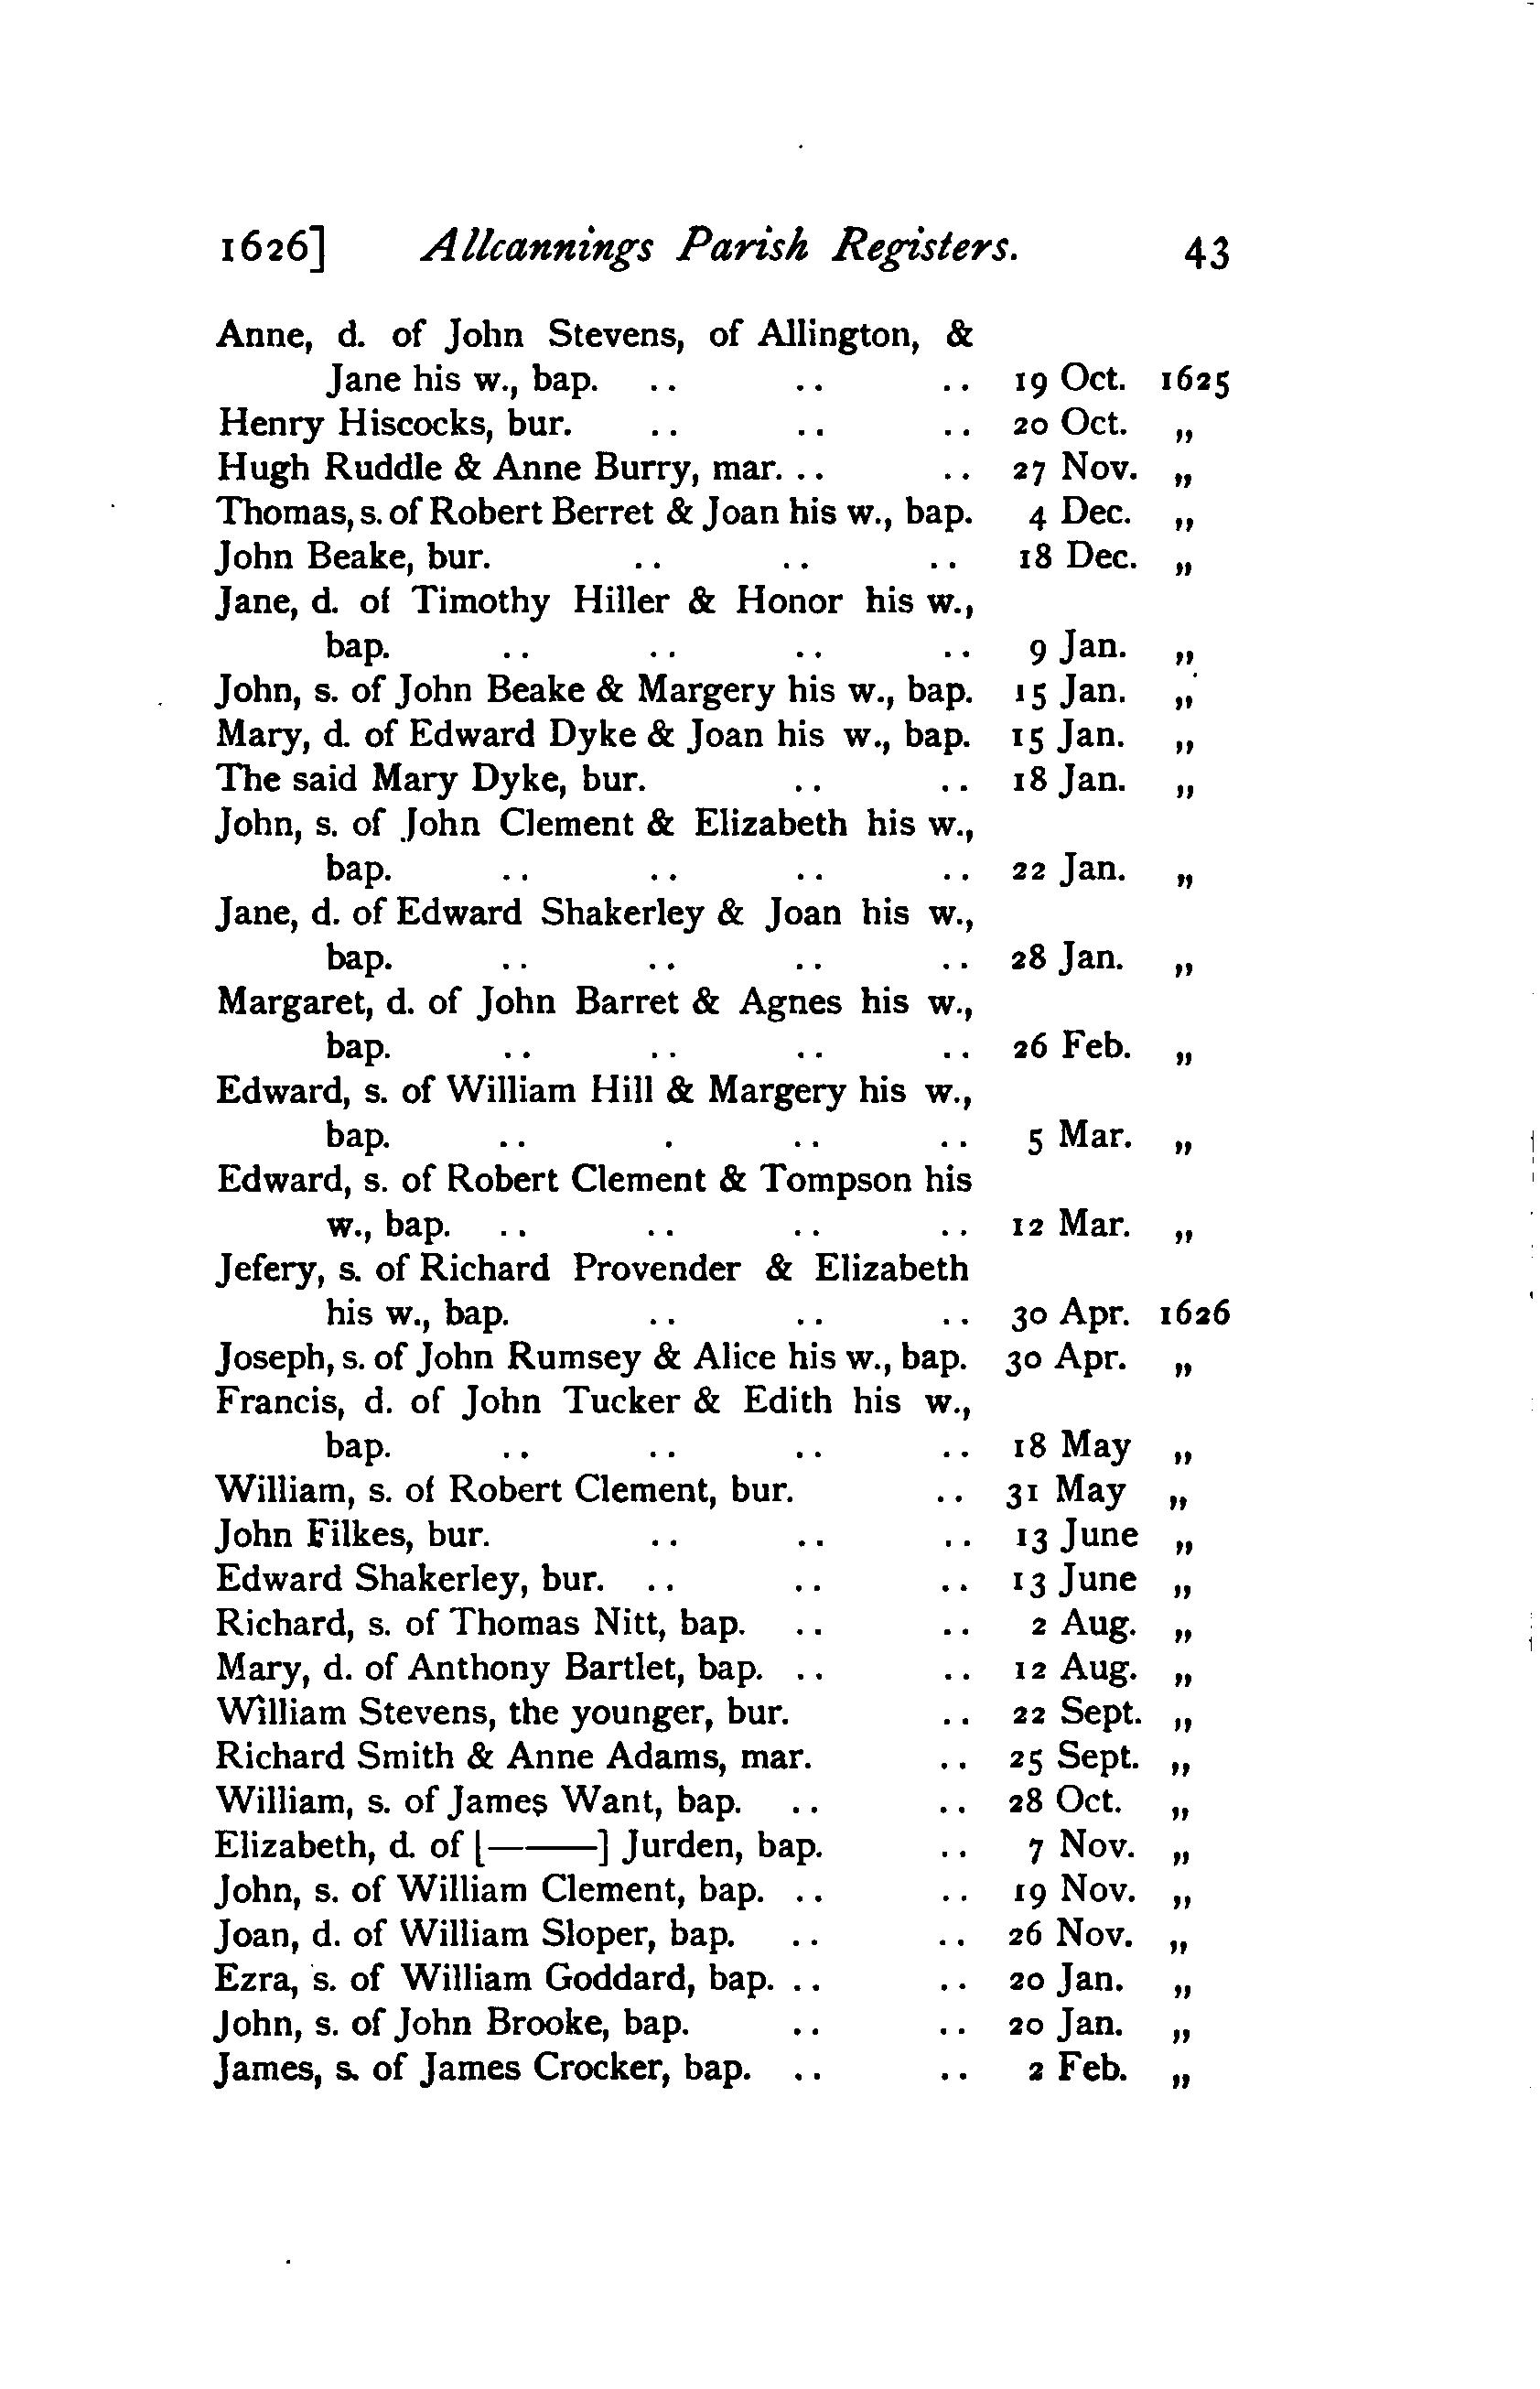 All Cannings parish registers transcribed in 1905 showing 1626 baptism of Francis Tucker